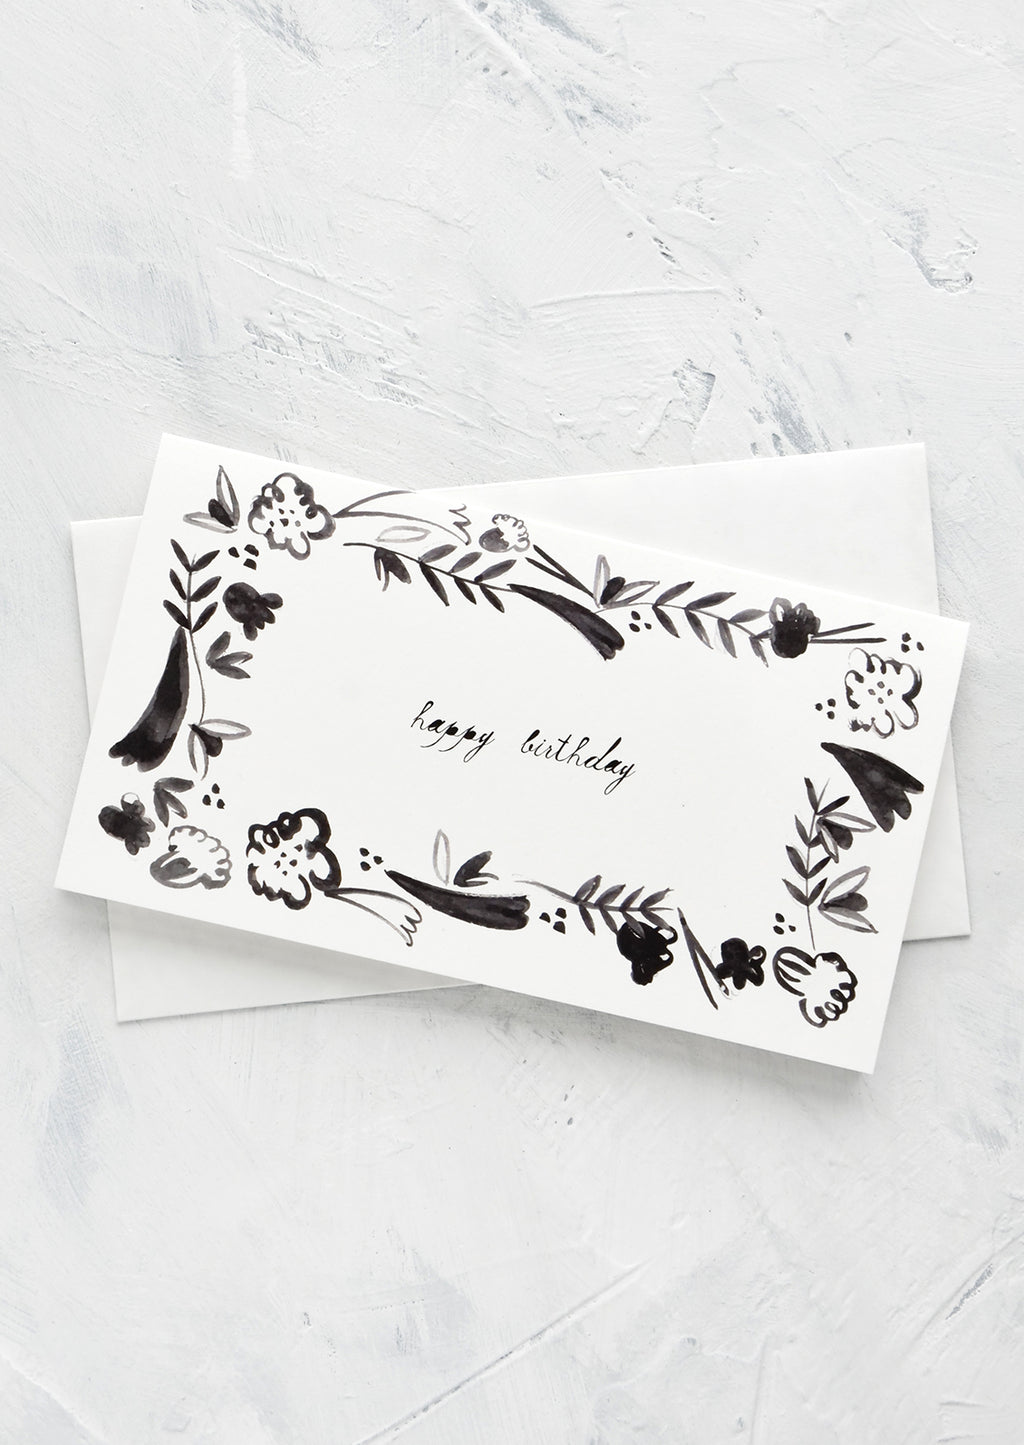 2: Black and white greeting card with floral frame around "happy birthday" script at middle